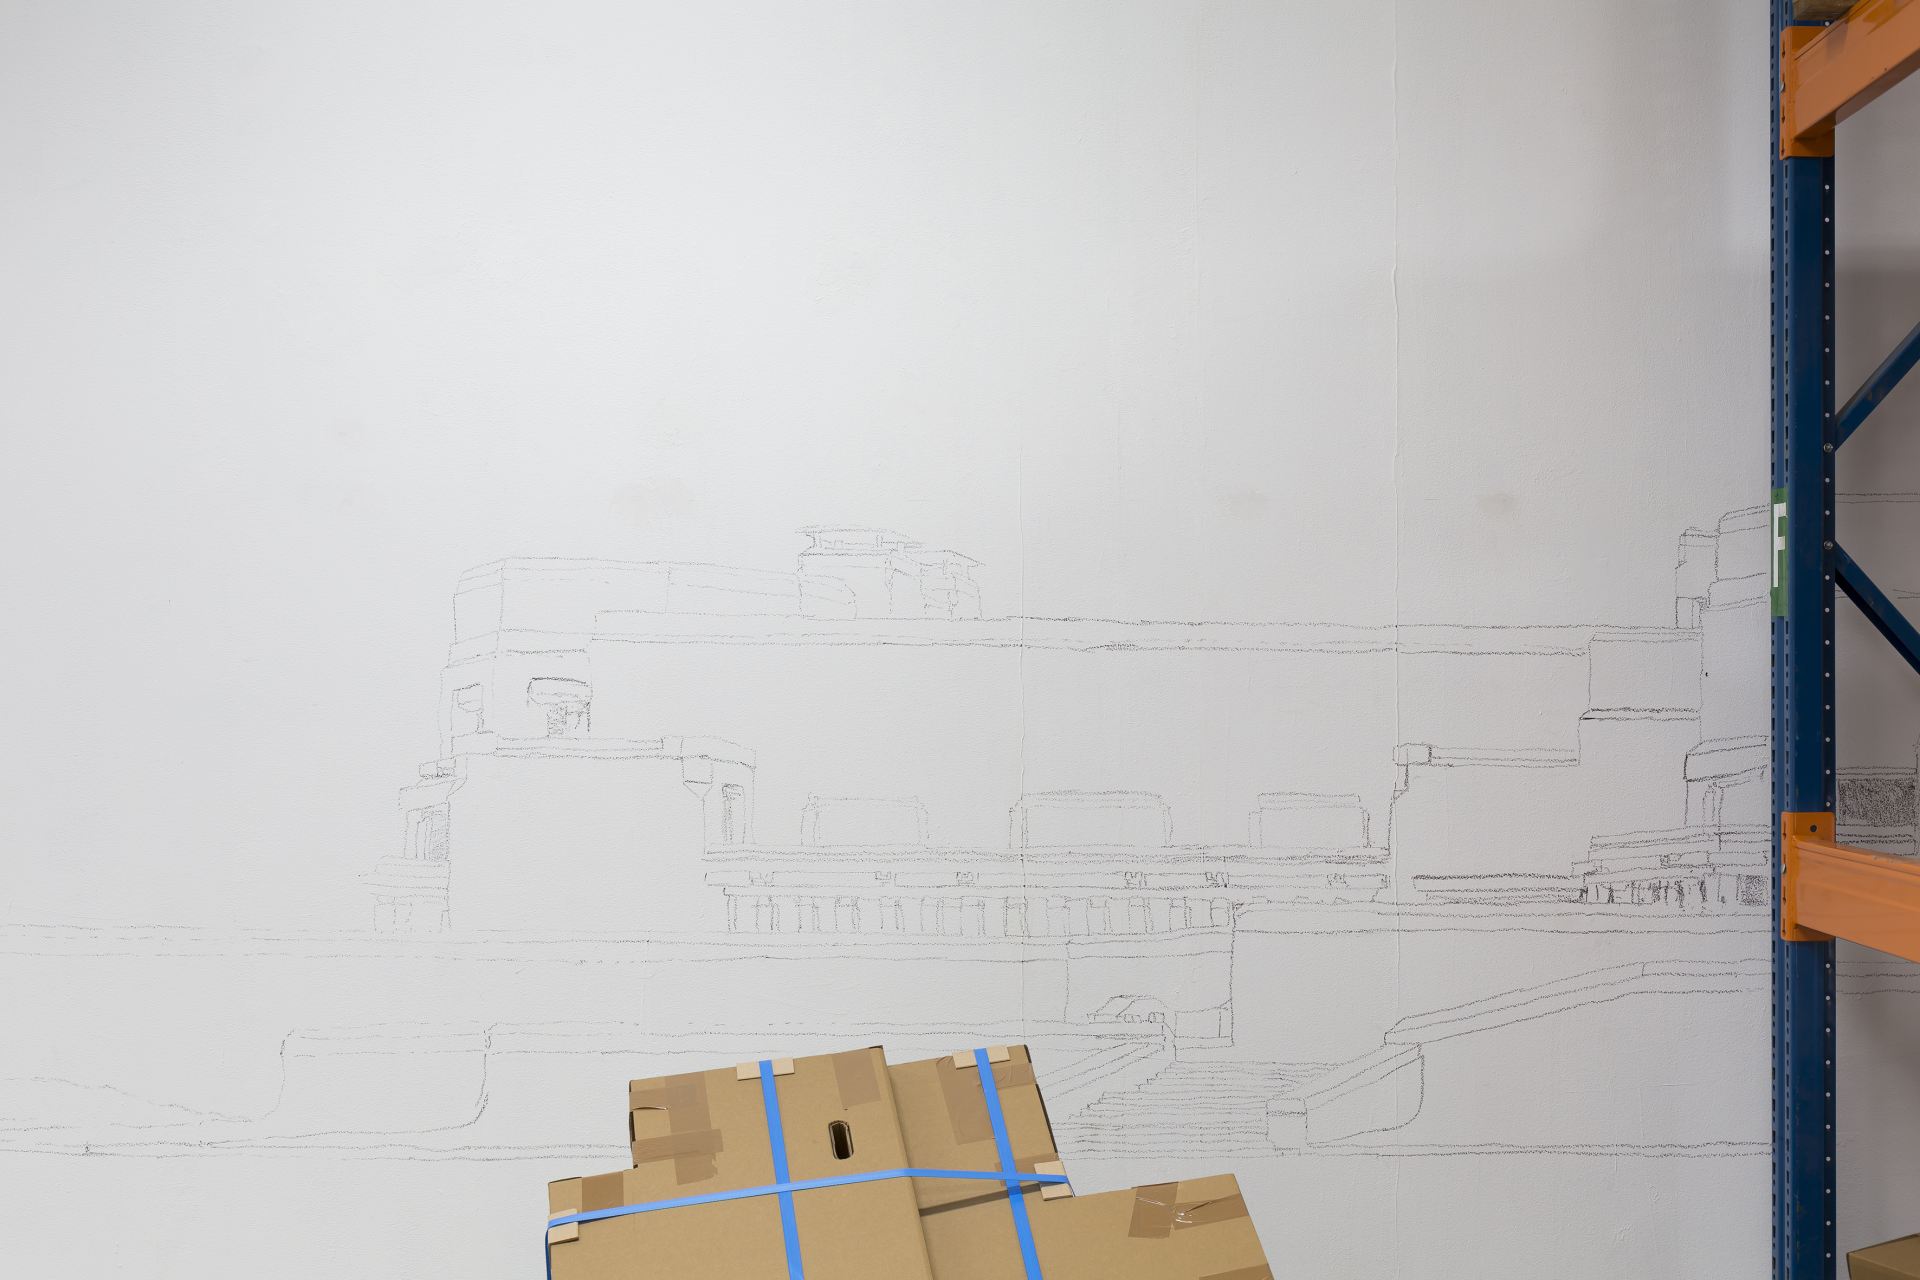 Installation shots of a room fitted with shelves and decorated with cardboard boxes on pallets.